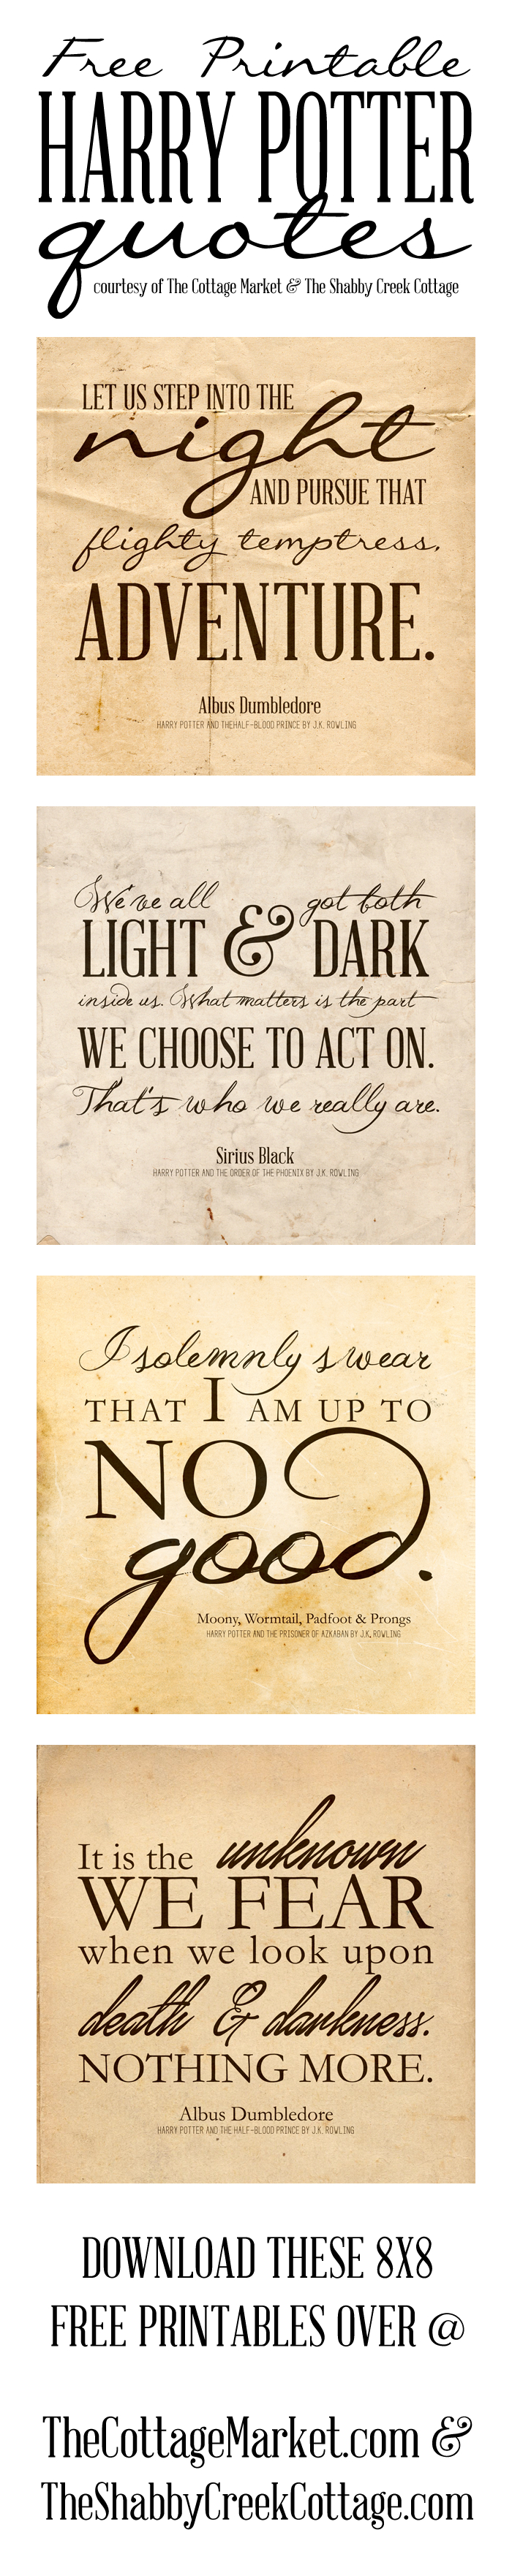 Free Harry Potter Quotes Printables - Free Printable Harry Potter Pictures